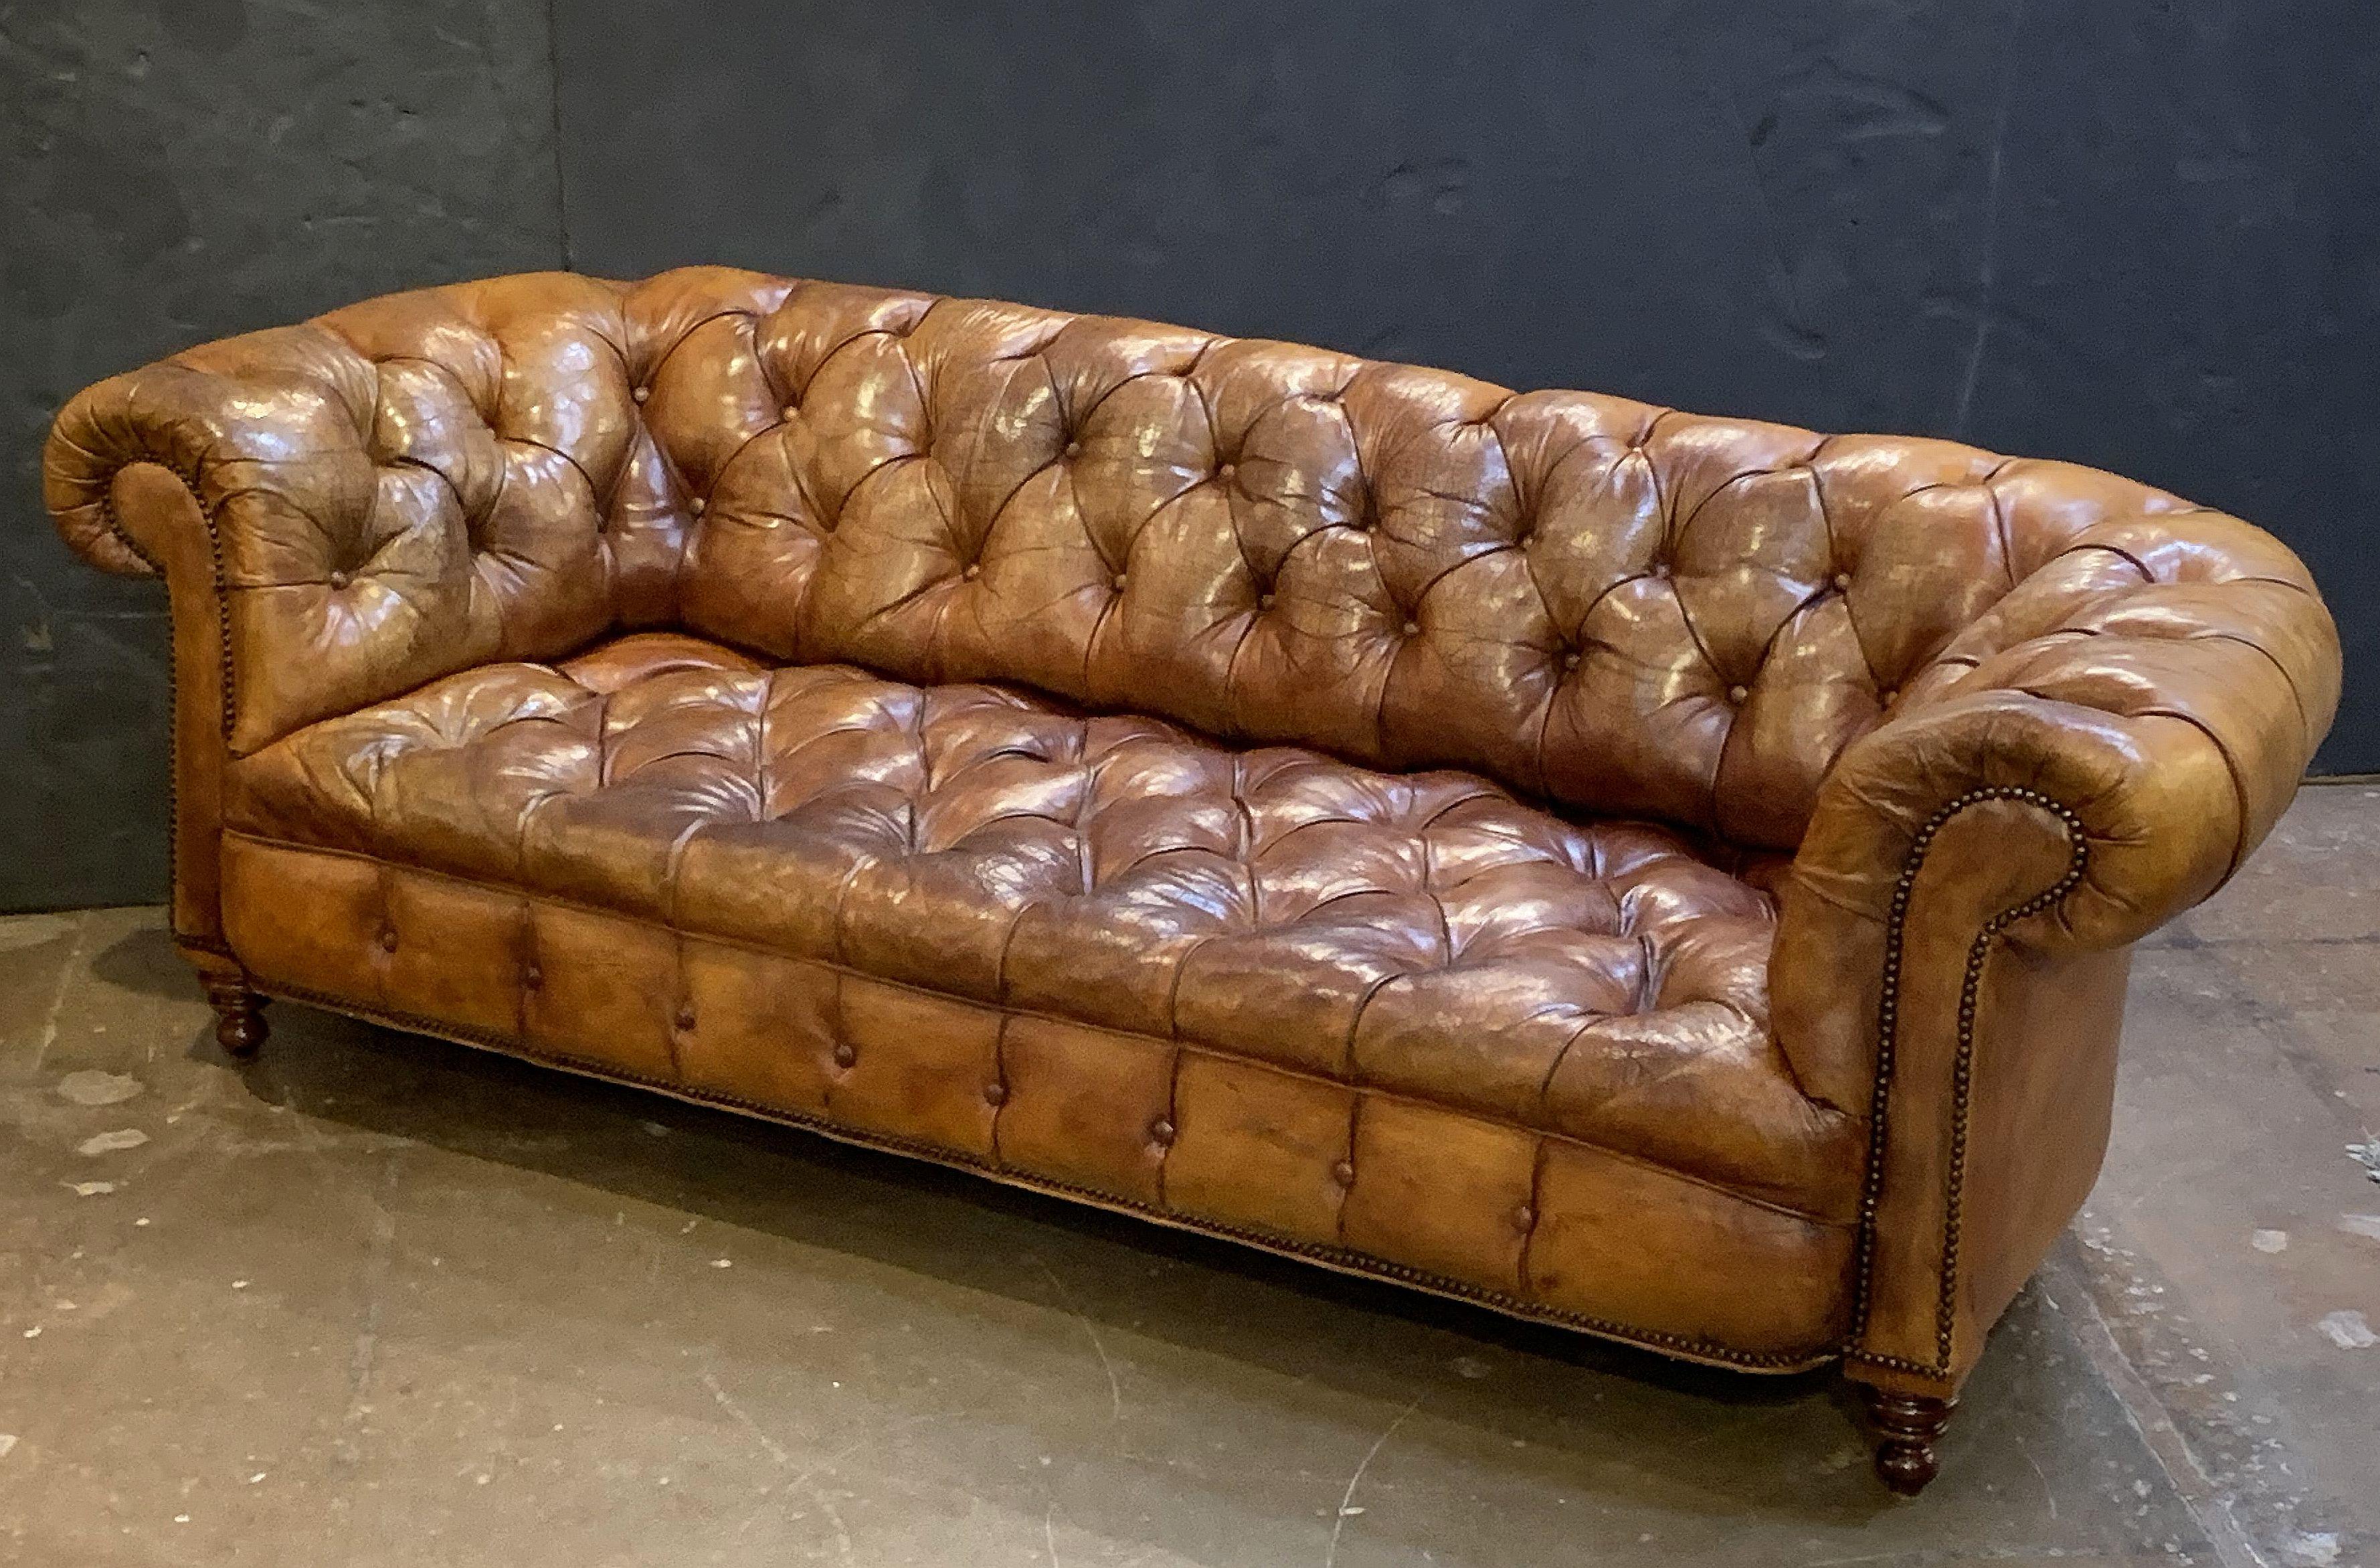 20th Century English Chesterfield Sofa of Tufted Leather